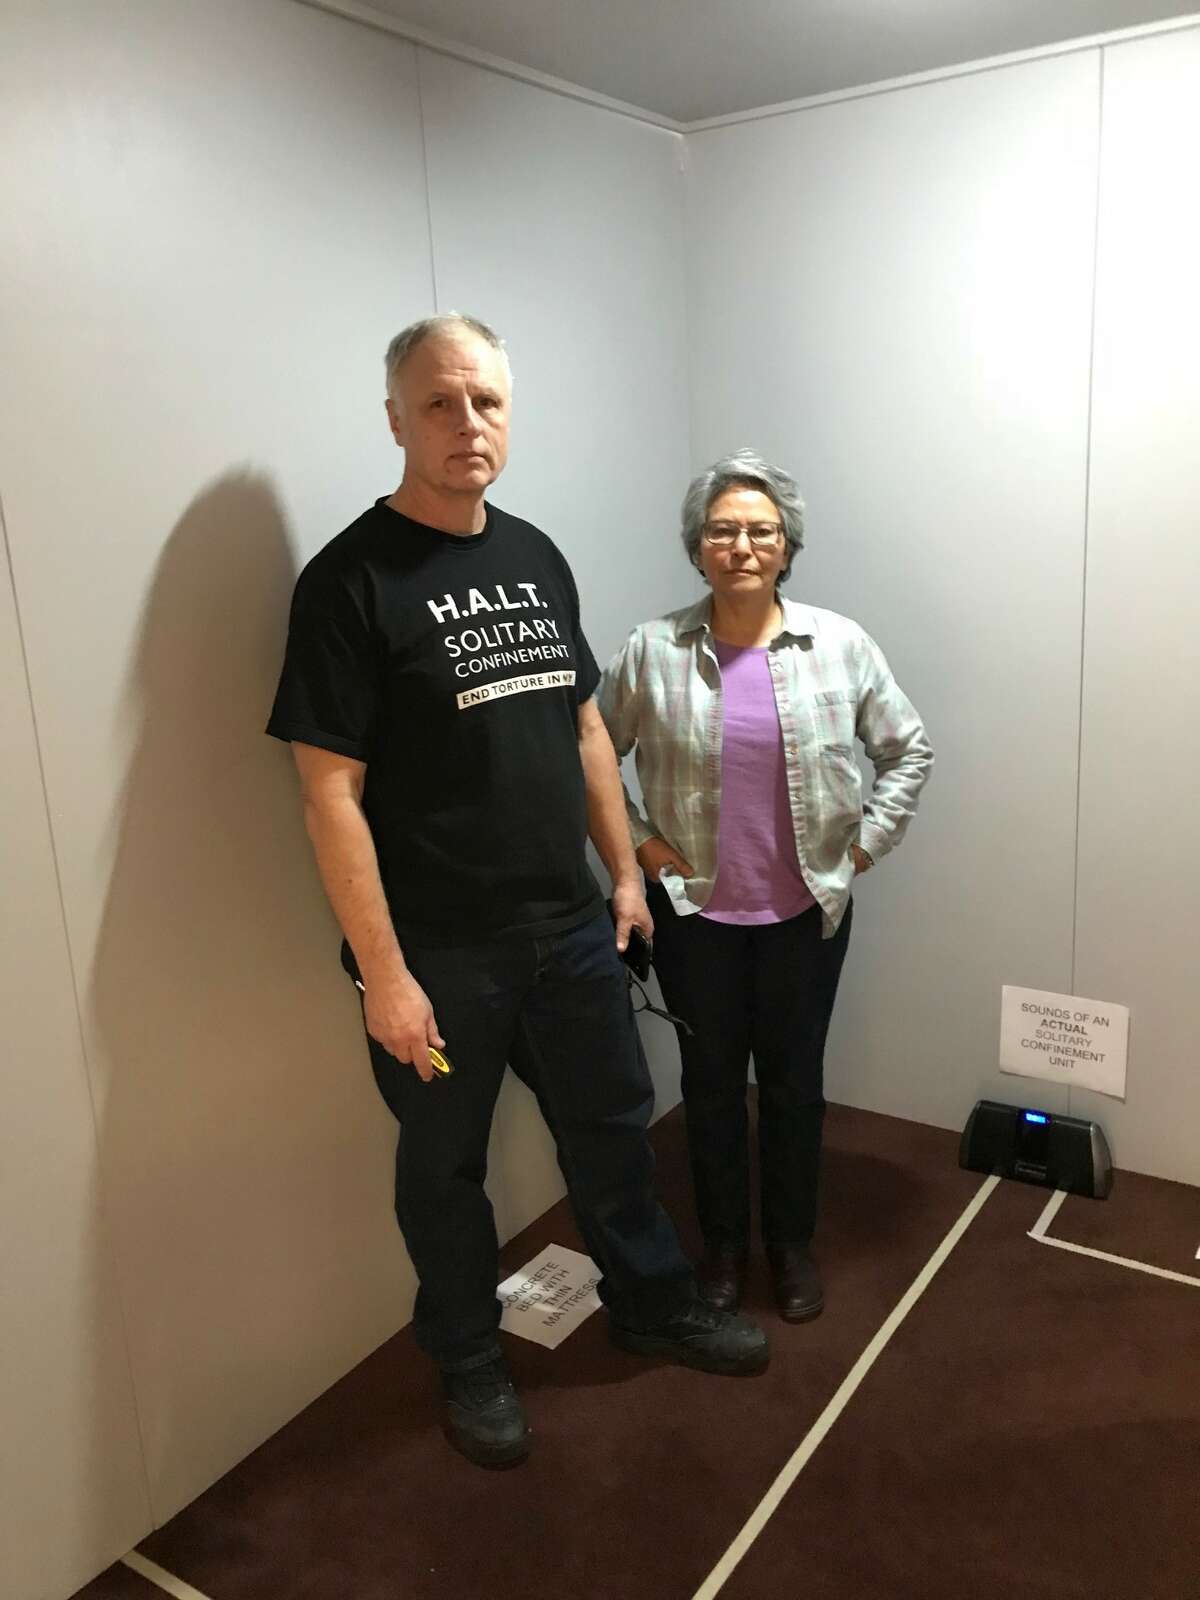 Alicia Barraza, left, and her husband, Douglas Van Zandt, inside a replica solitary confinement cell set up on Sunday, March 18 at Siena College for a performance of "The Exonerated."